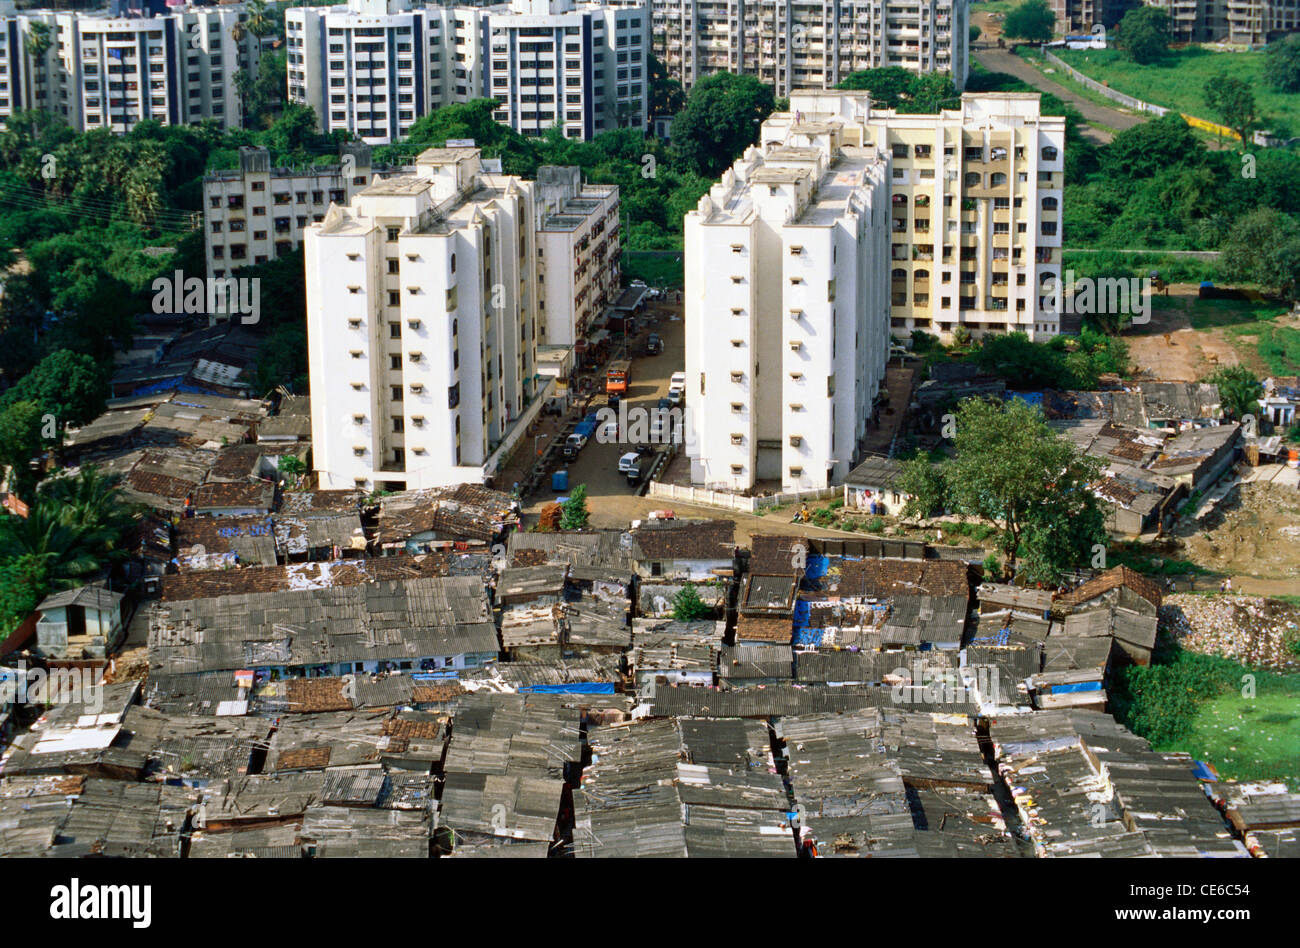 aerial-view-of-city-slums-and-buildings-rich-and-poor-bombay-mumbai-CE6C54.jpg